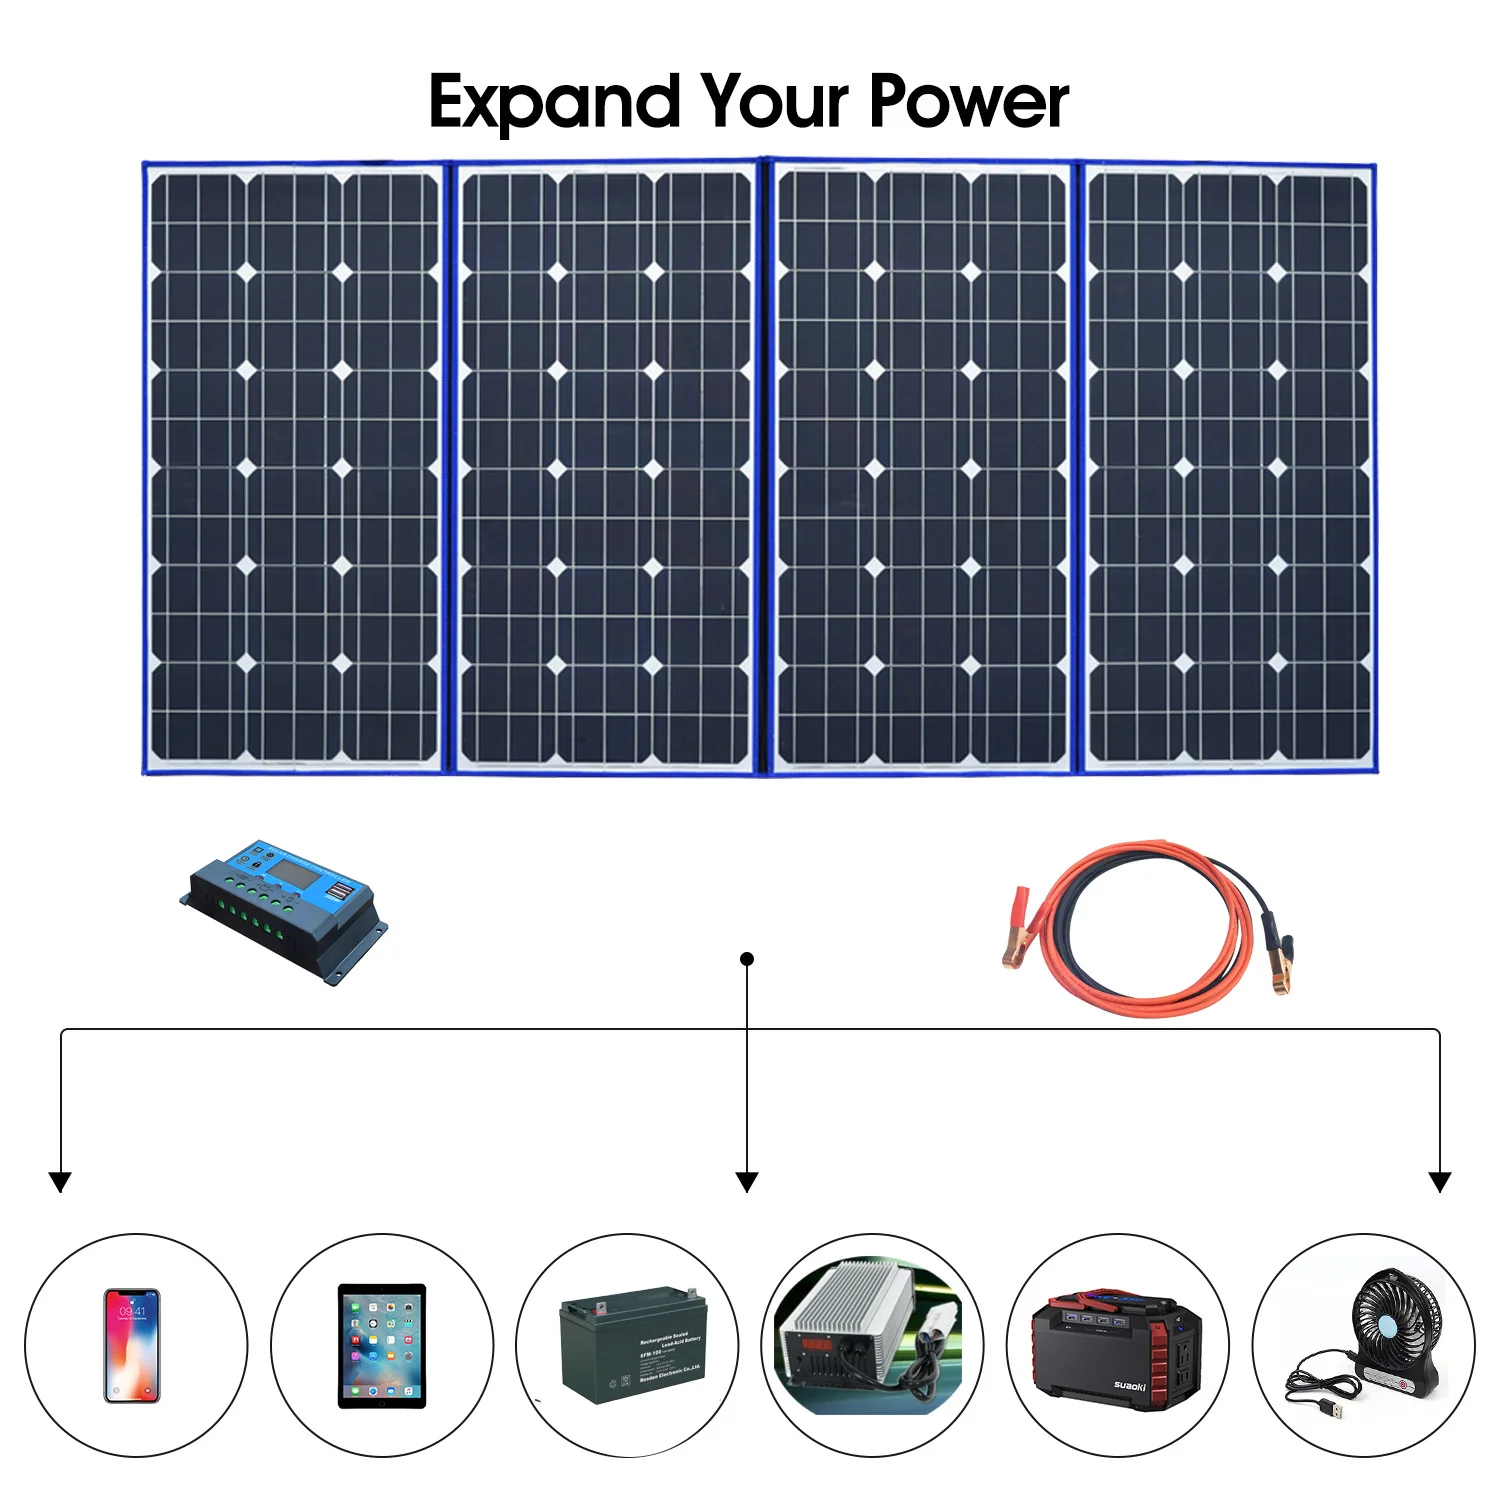 XINPUGAUNG Highly Portable 18V 320w Solar Panel(80Wx4Pc) China+12V Controller Panels Solar Battery Charge Motorhome RV Car